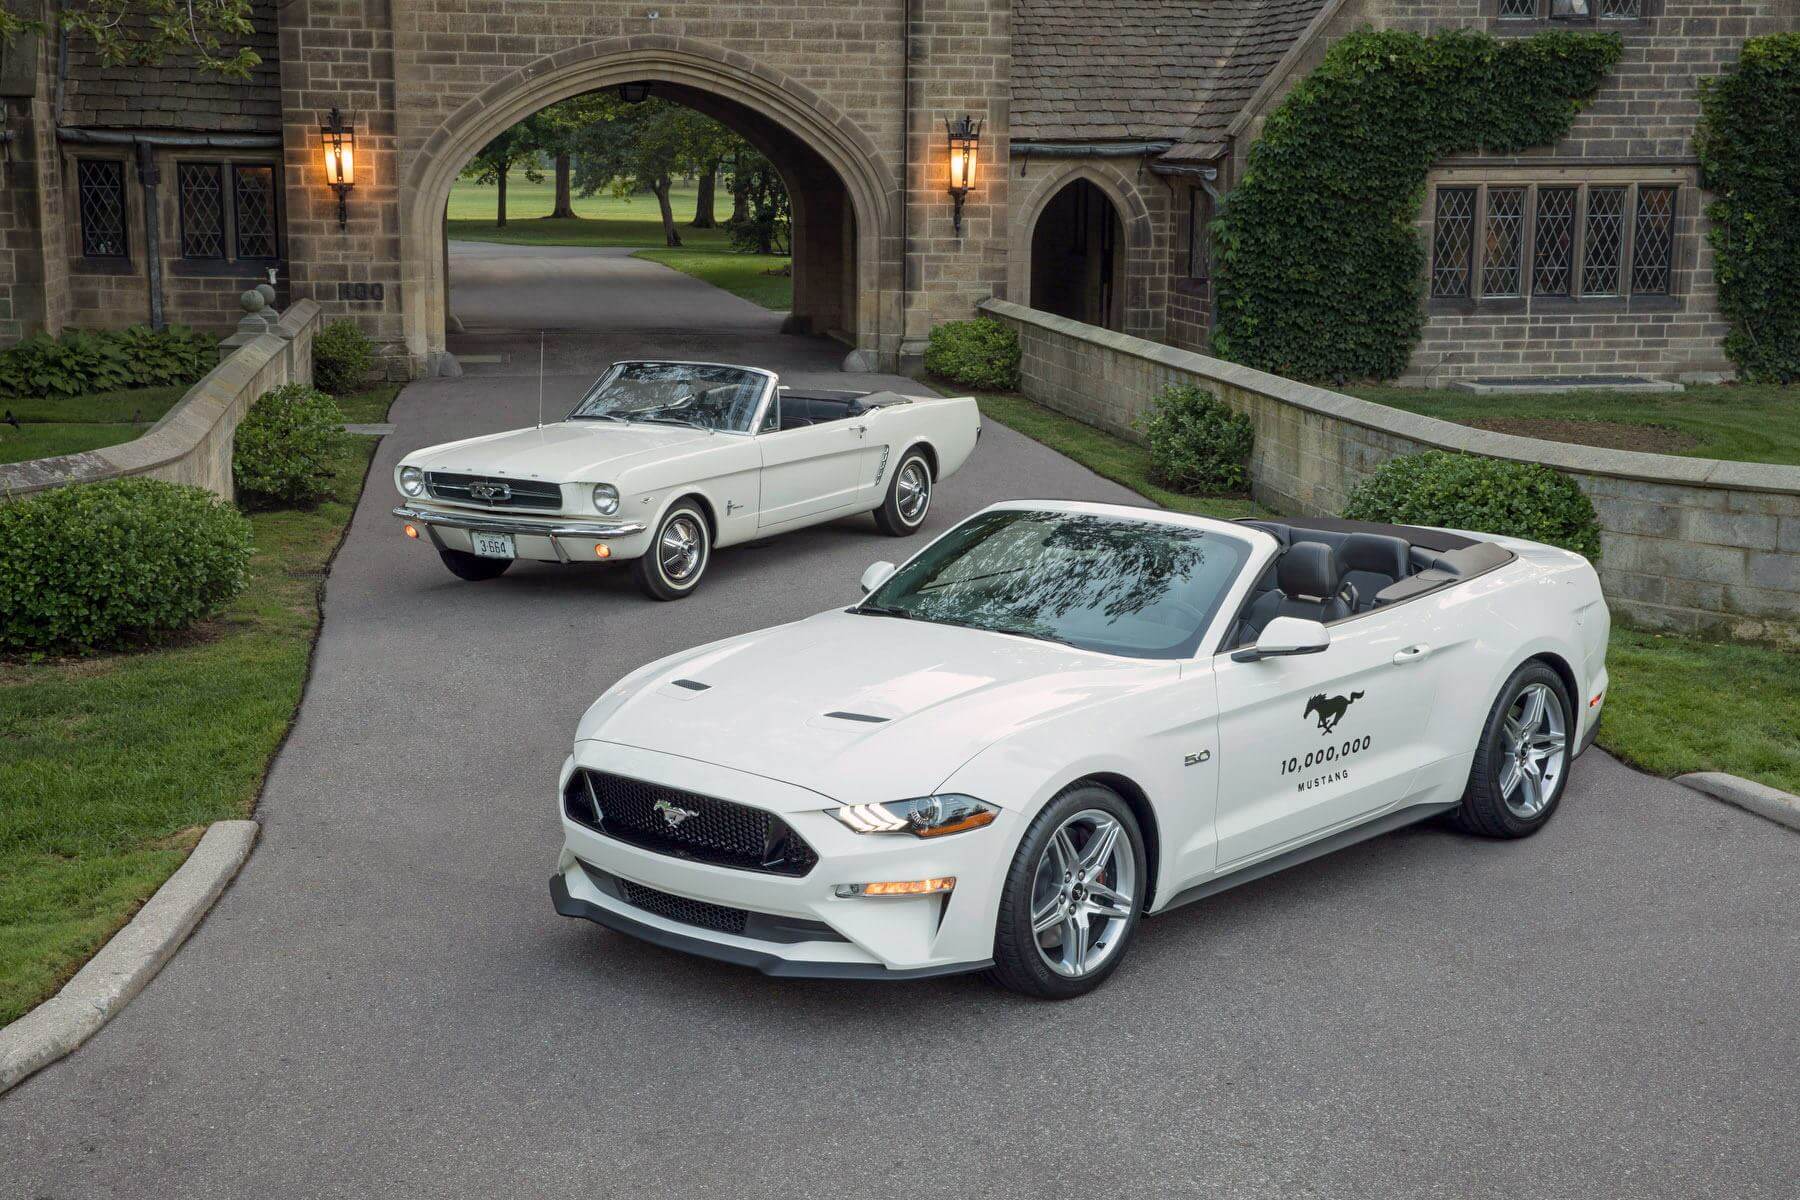 10 millionth Ford Mustang